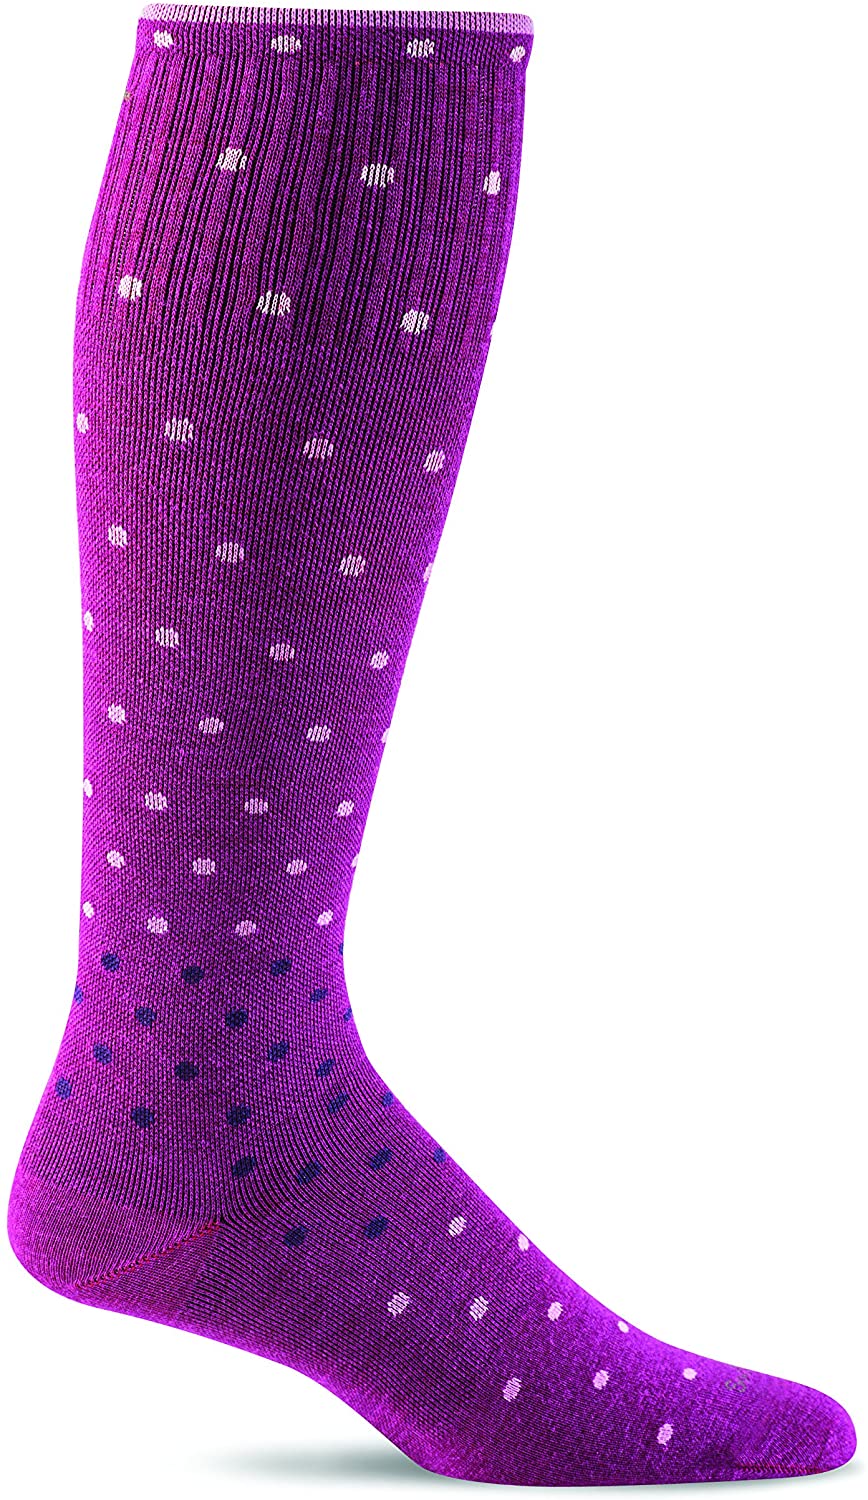 Sockwell Women's On the Spot Sock in Violet color from the side